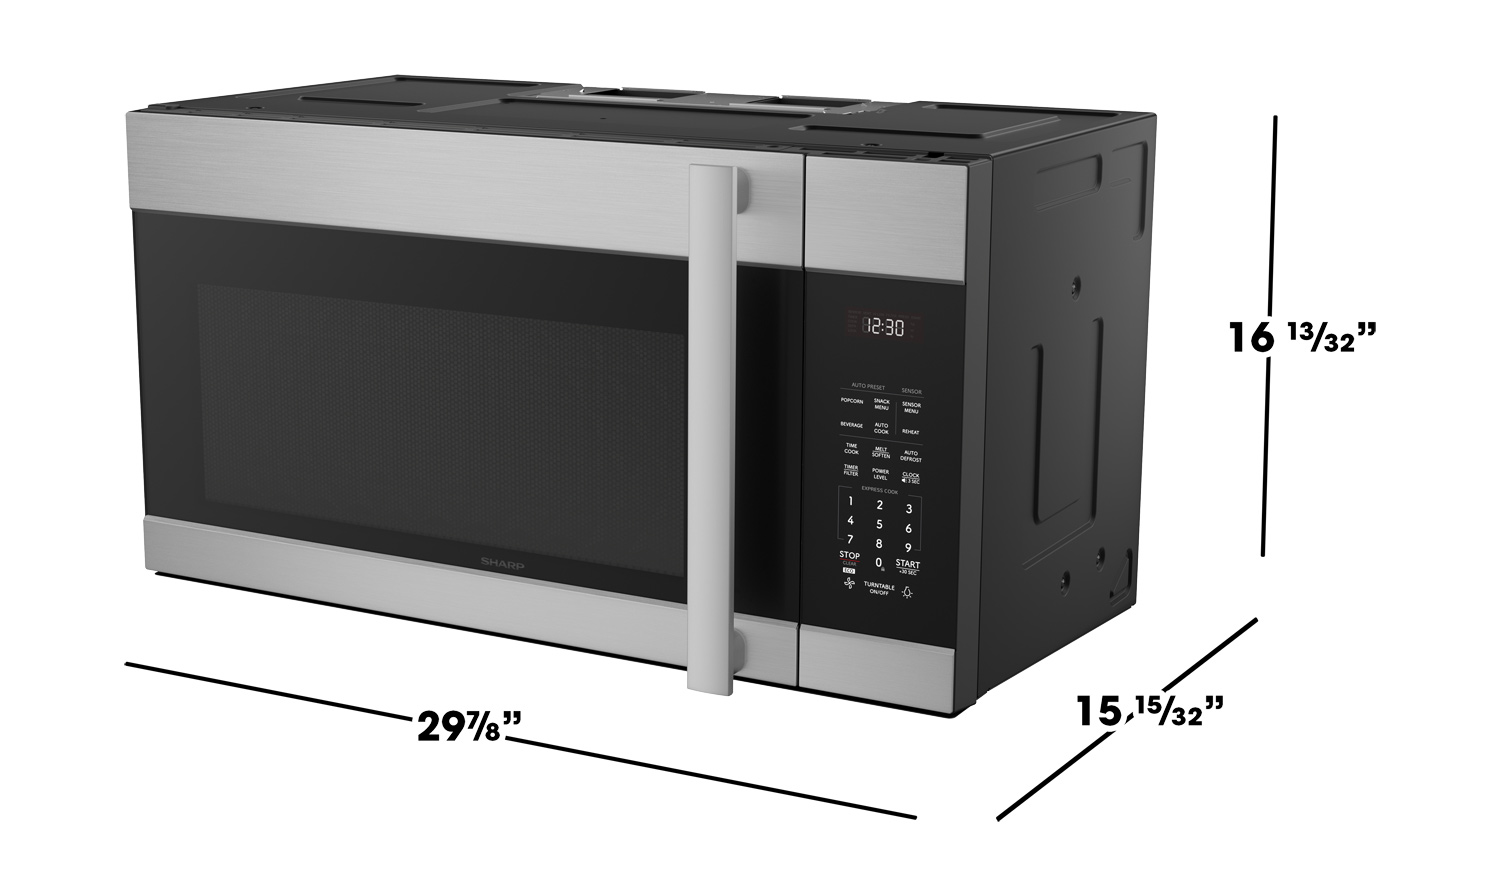 Over-the-Range Microwave with stainless steel cavity - 1.7 cu. ft.